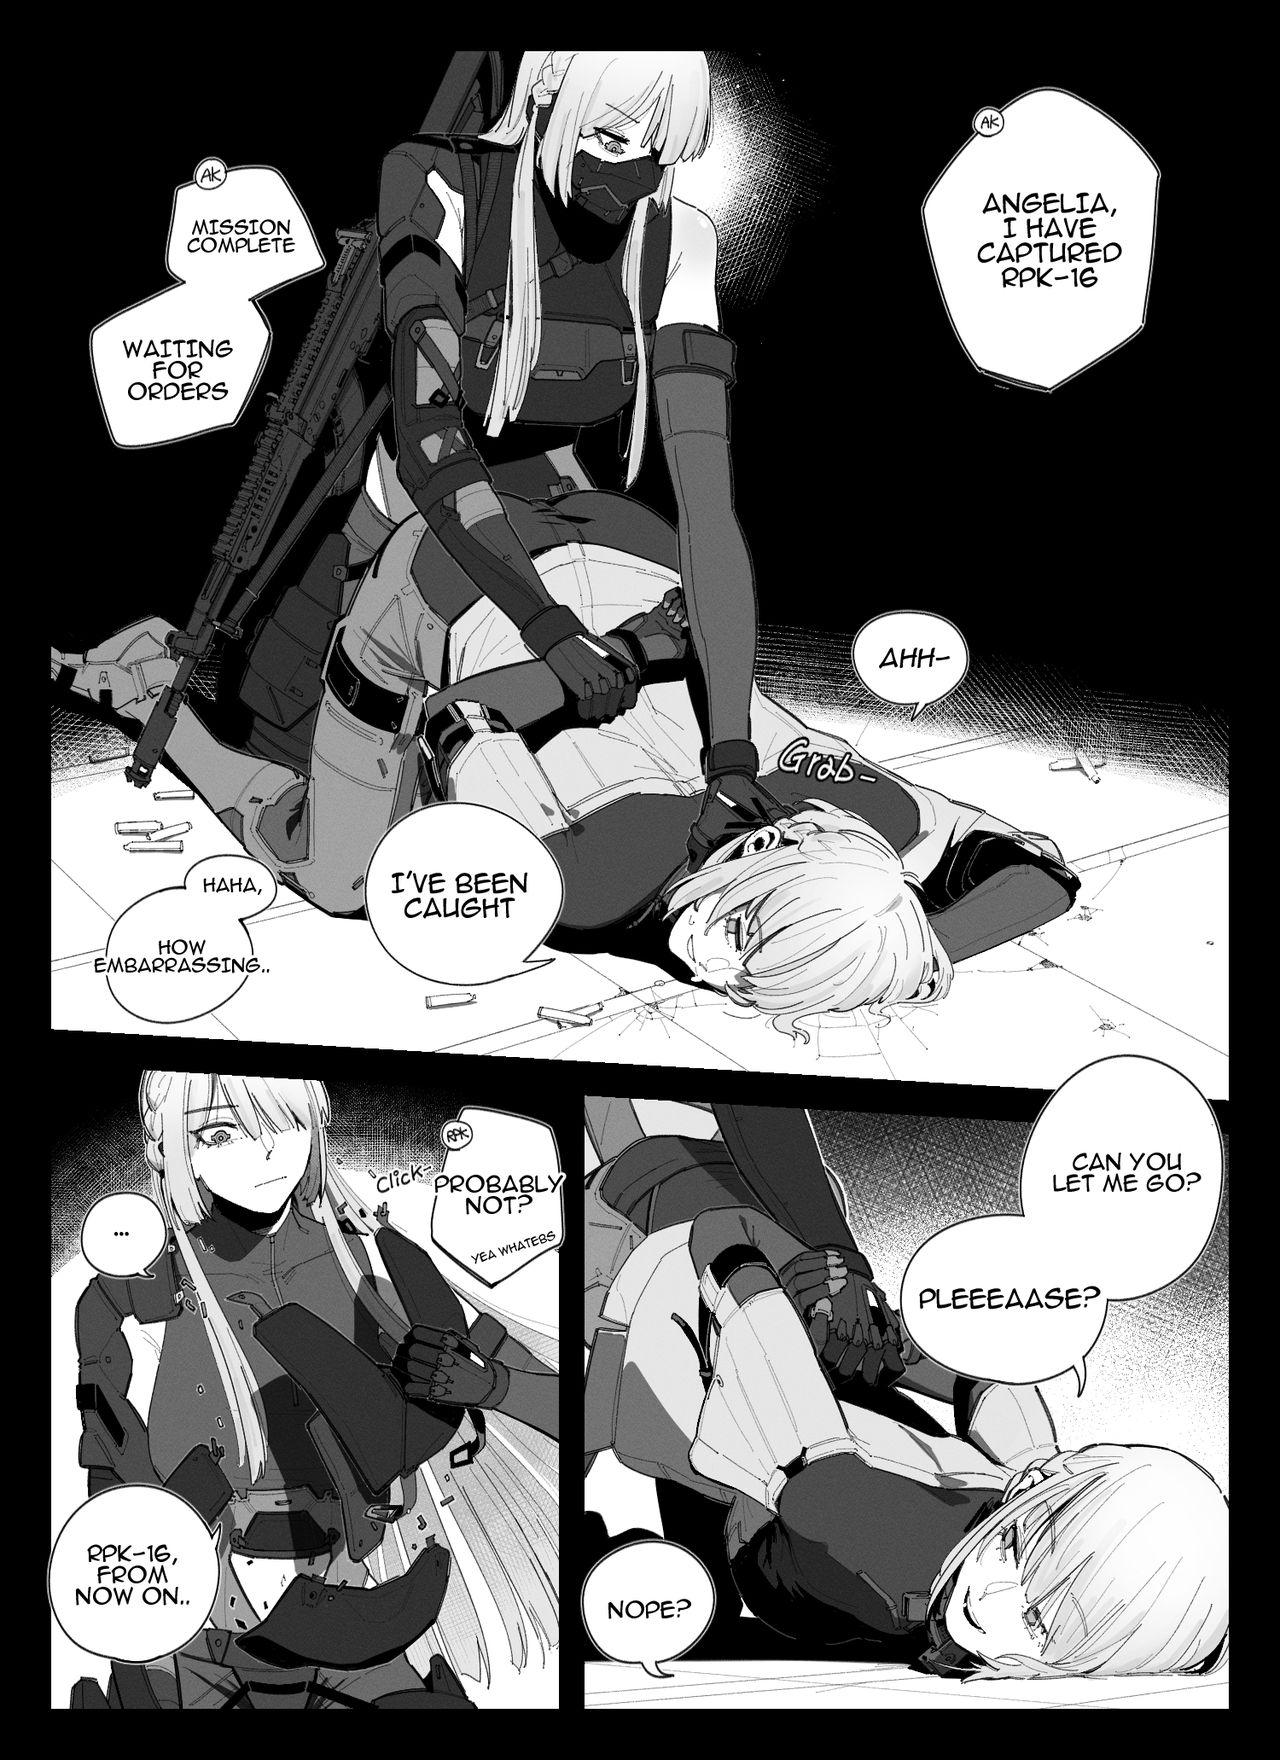 Fat Ass RPK Wants To Be A Human - Girls frontline Cuzinho - Page 1